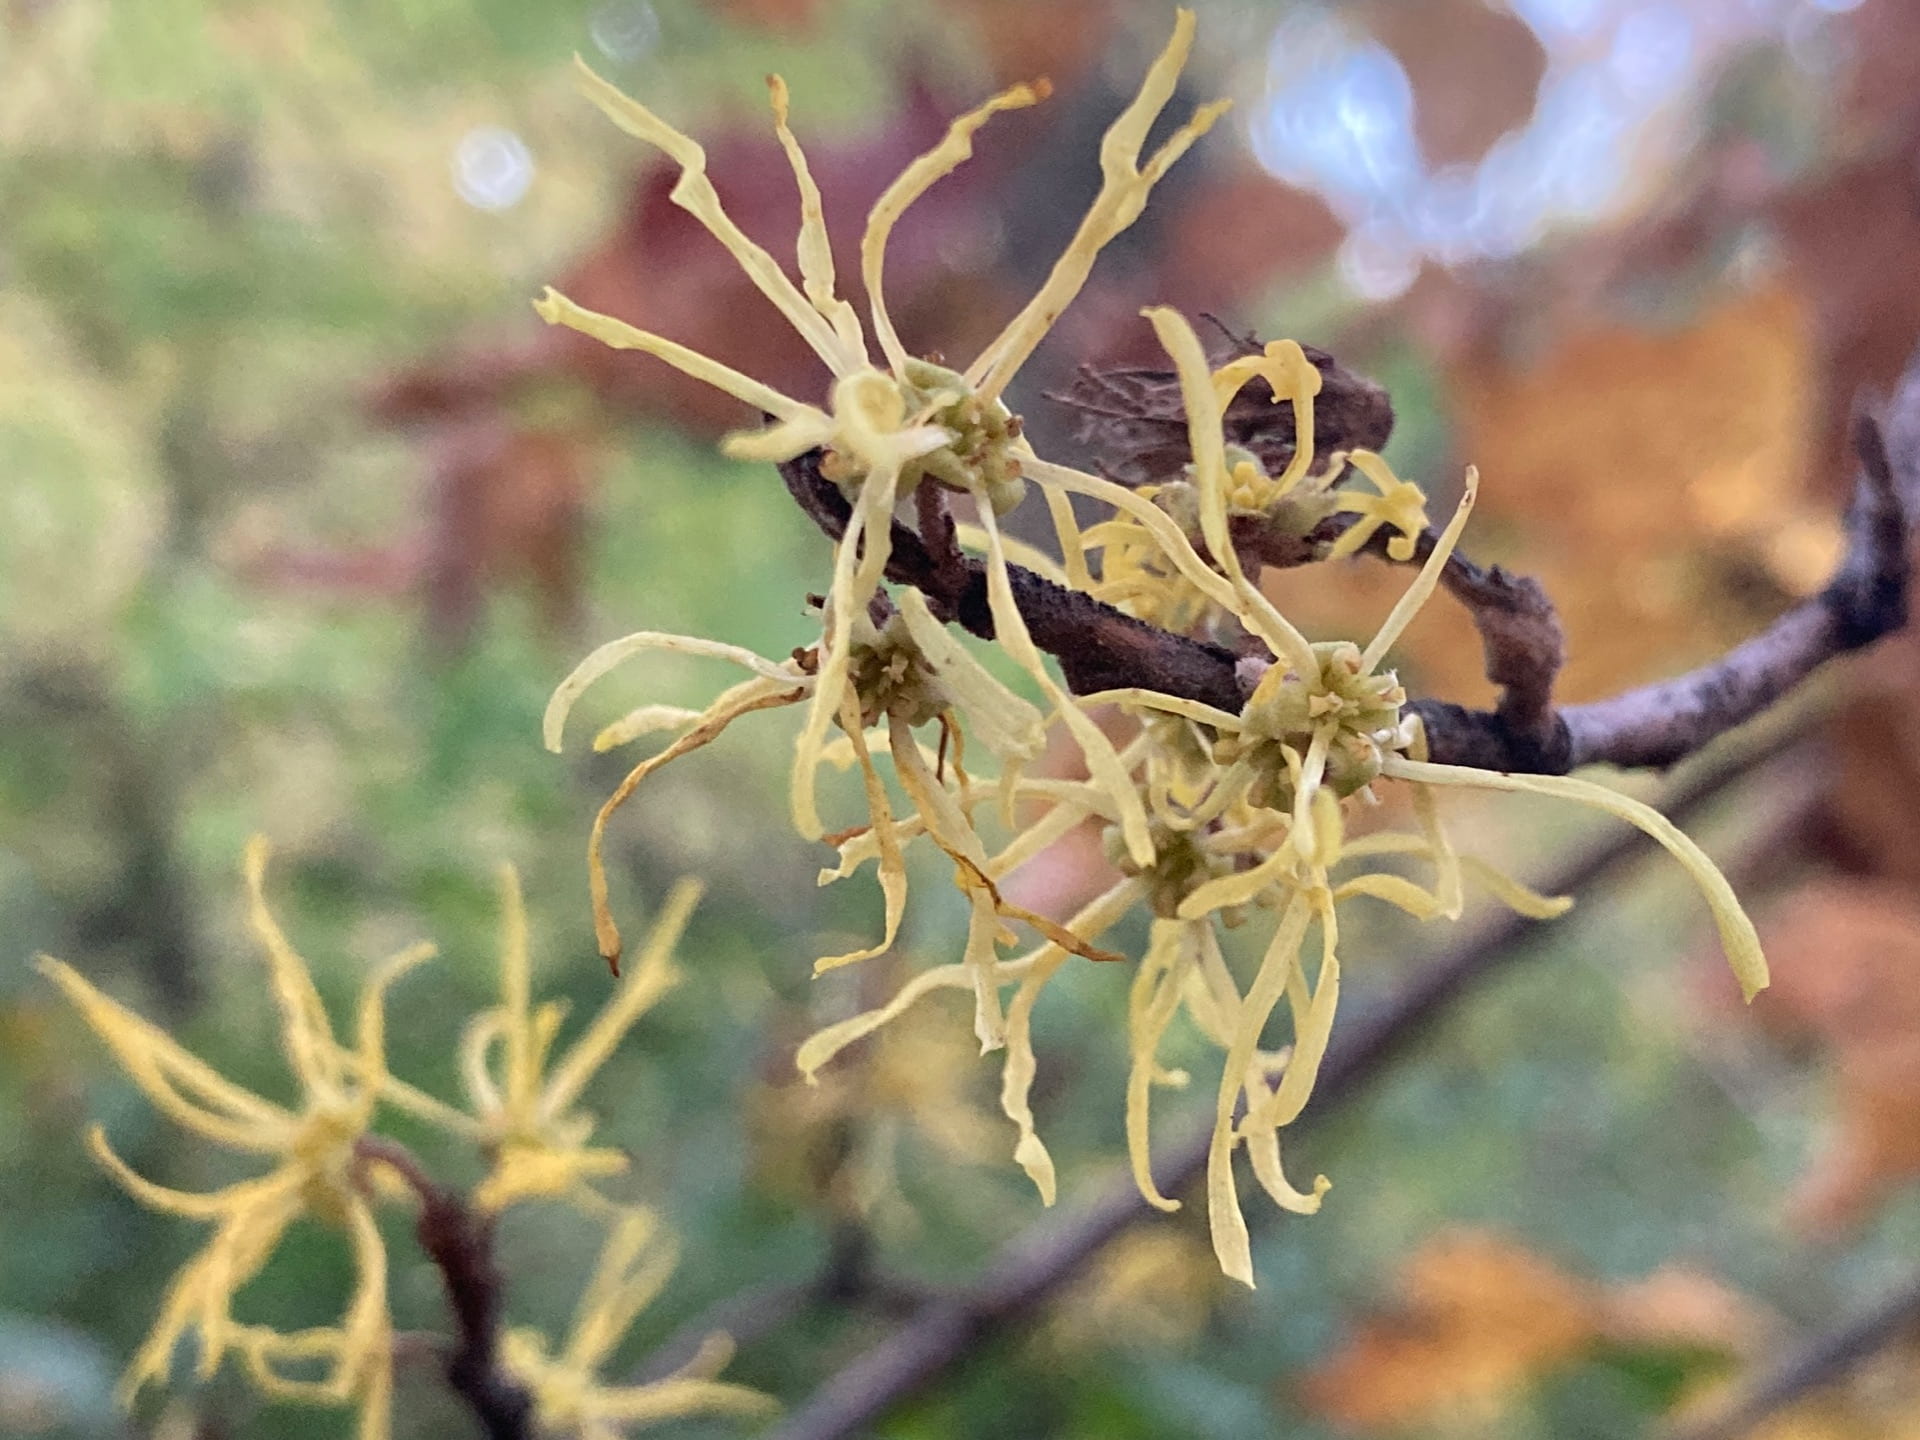 Hamamelis virginiana (witch hazel) blooms in the fall at the same time as the previous year's seeds mature. These seeds are expelled from the seed pod and can be catapulted up to 30 feet away!